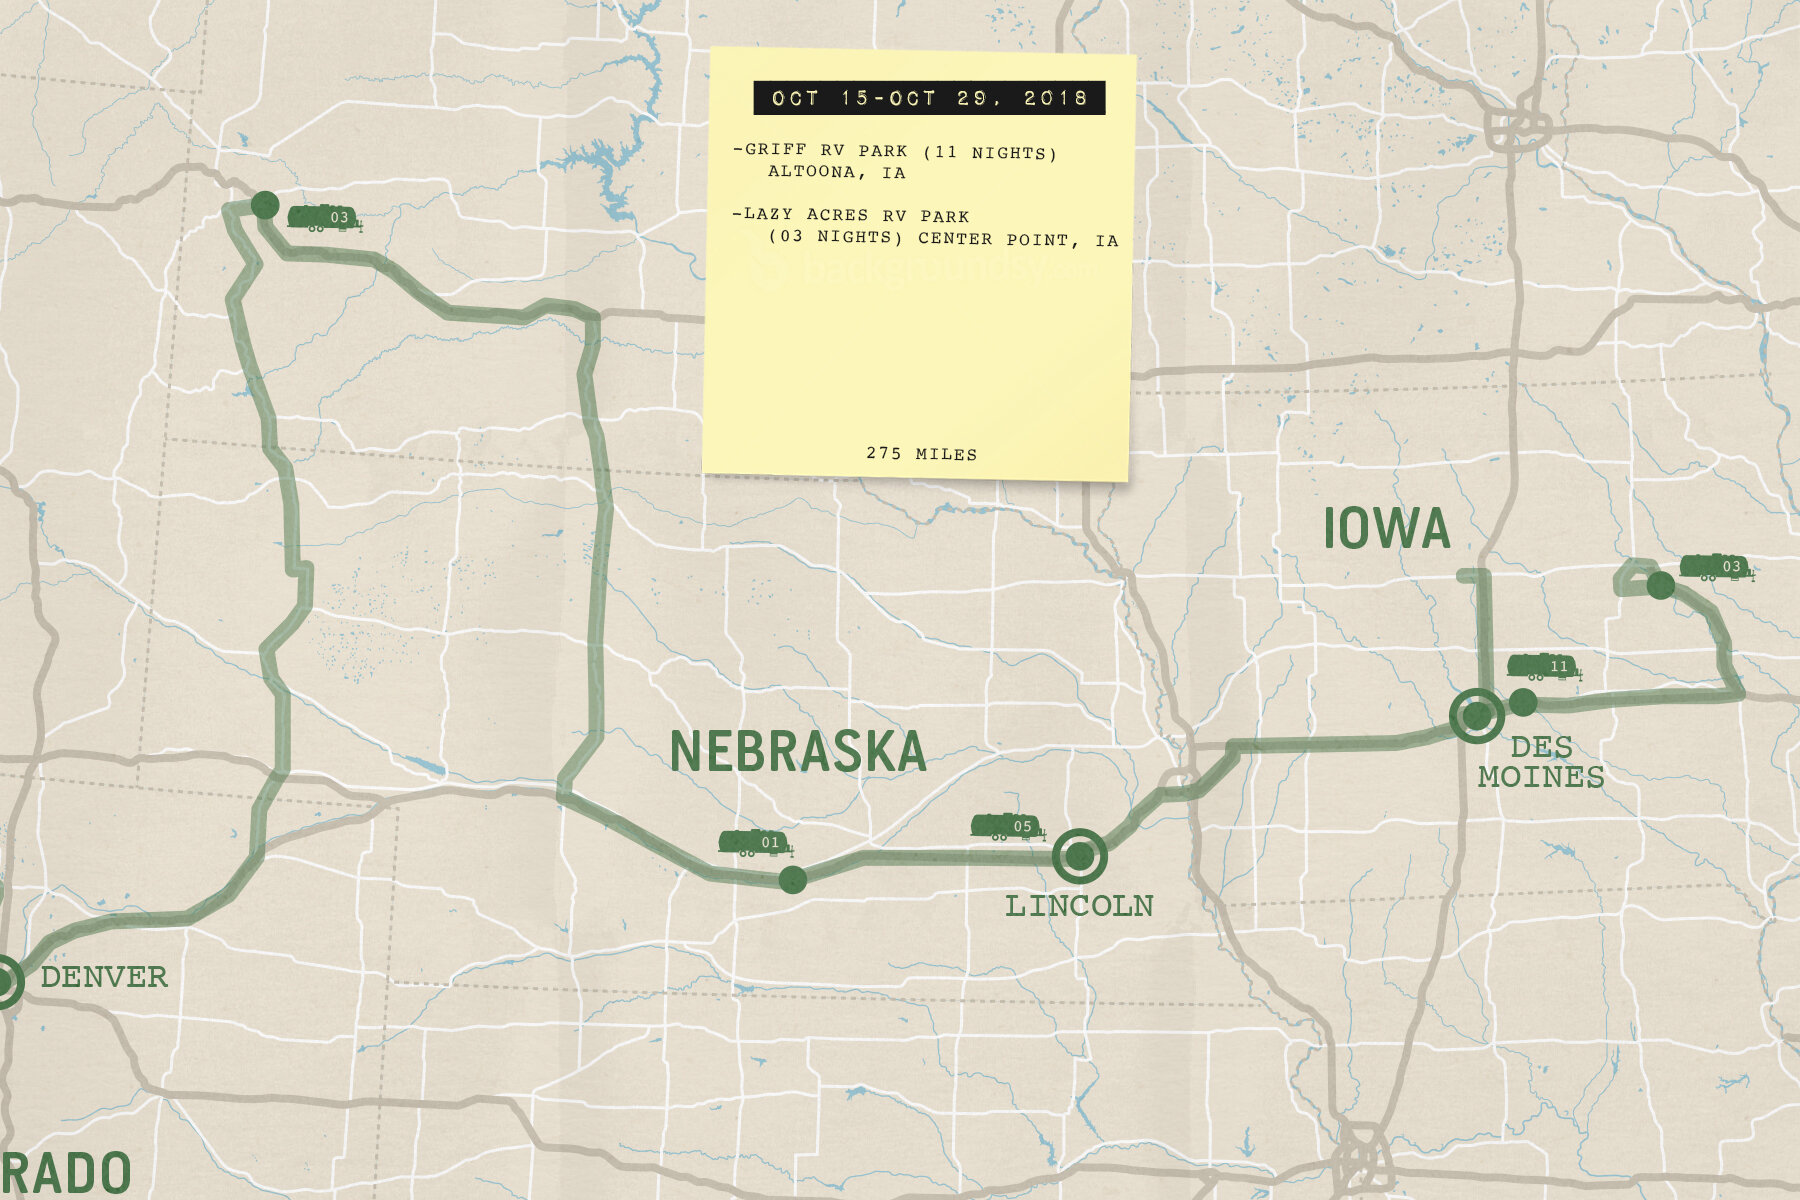 ourjourney-route31-IA.jpg